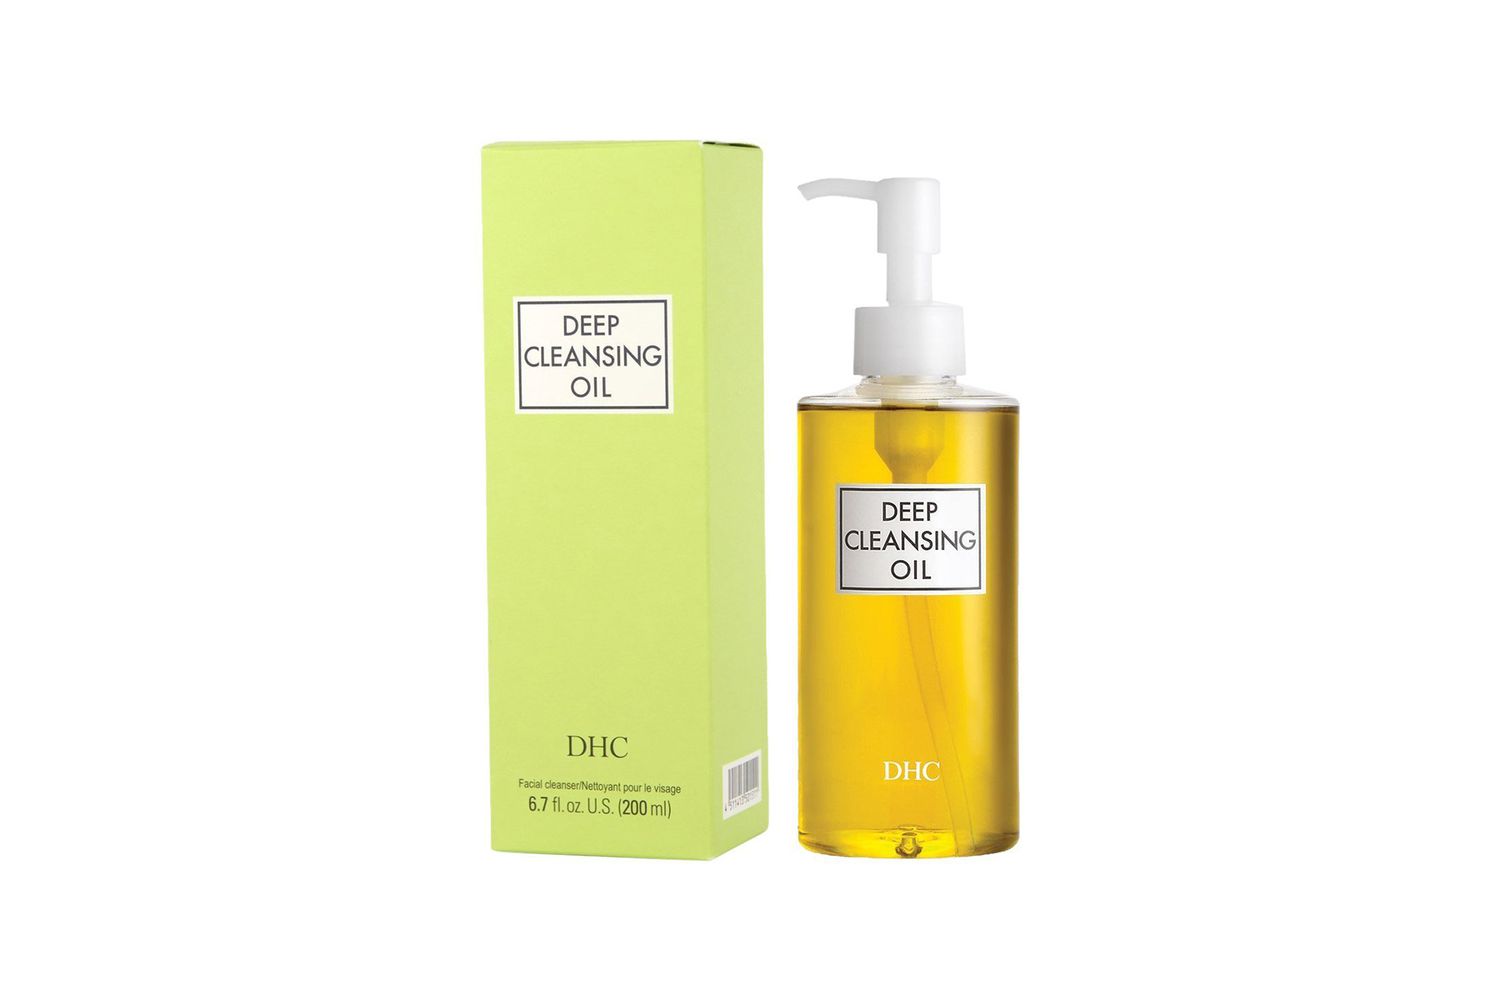 Best Cleansers on Amazon: DHC Cleansing Oil